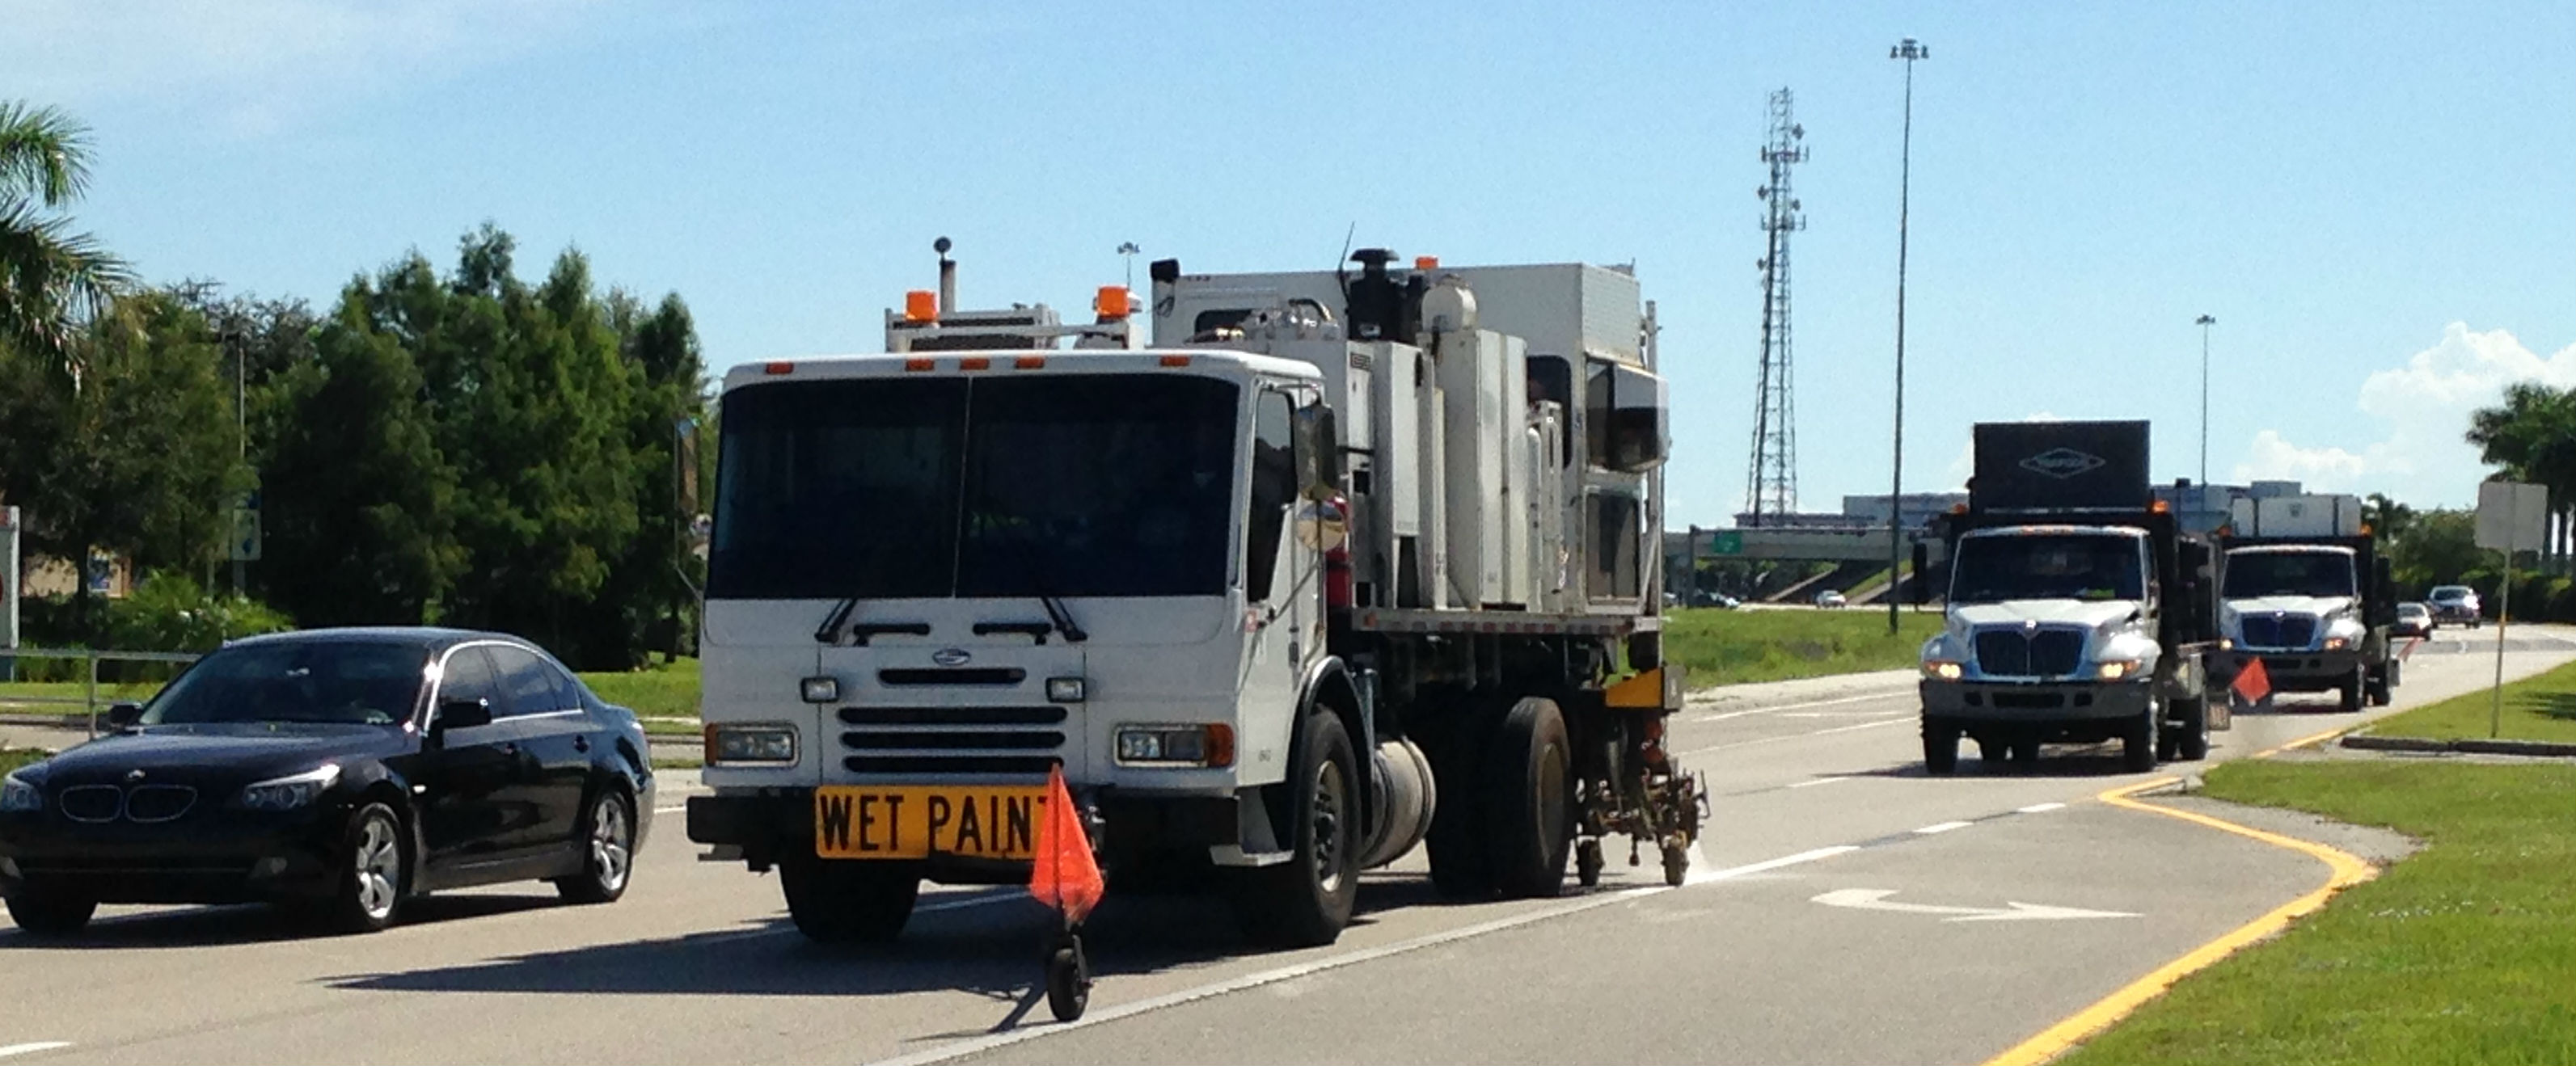 Image of Lee County Pavement Marking Truck